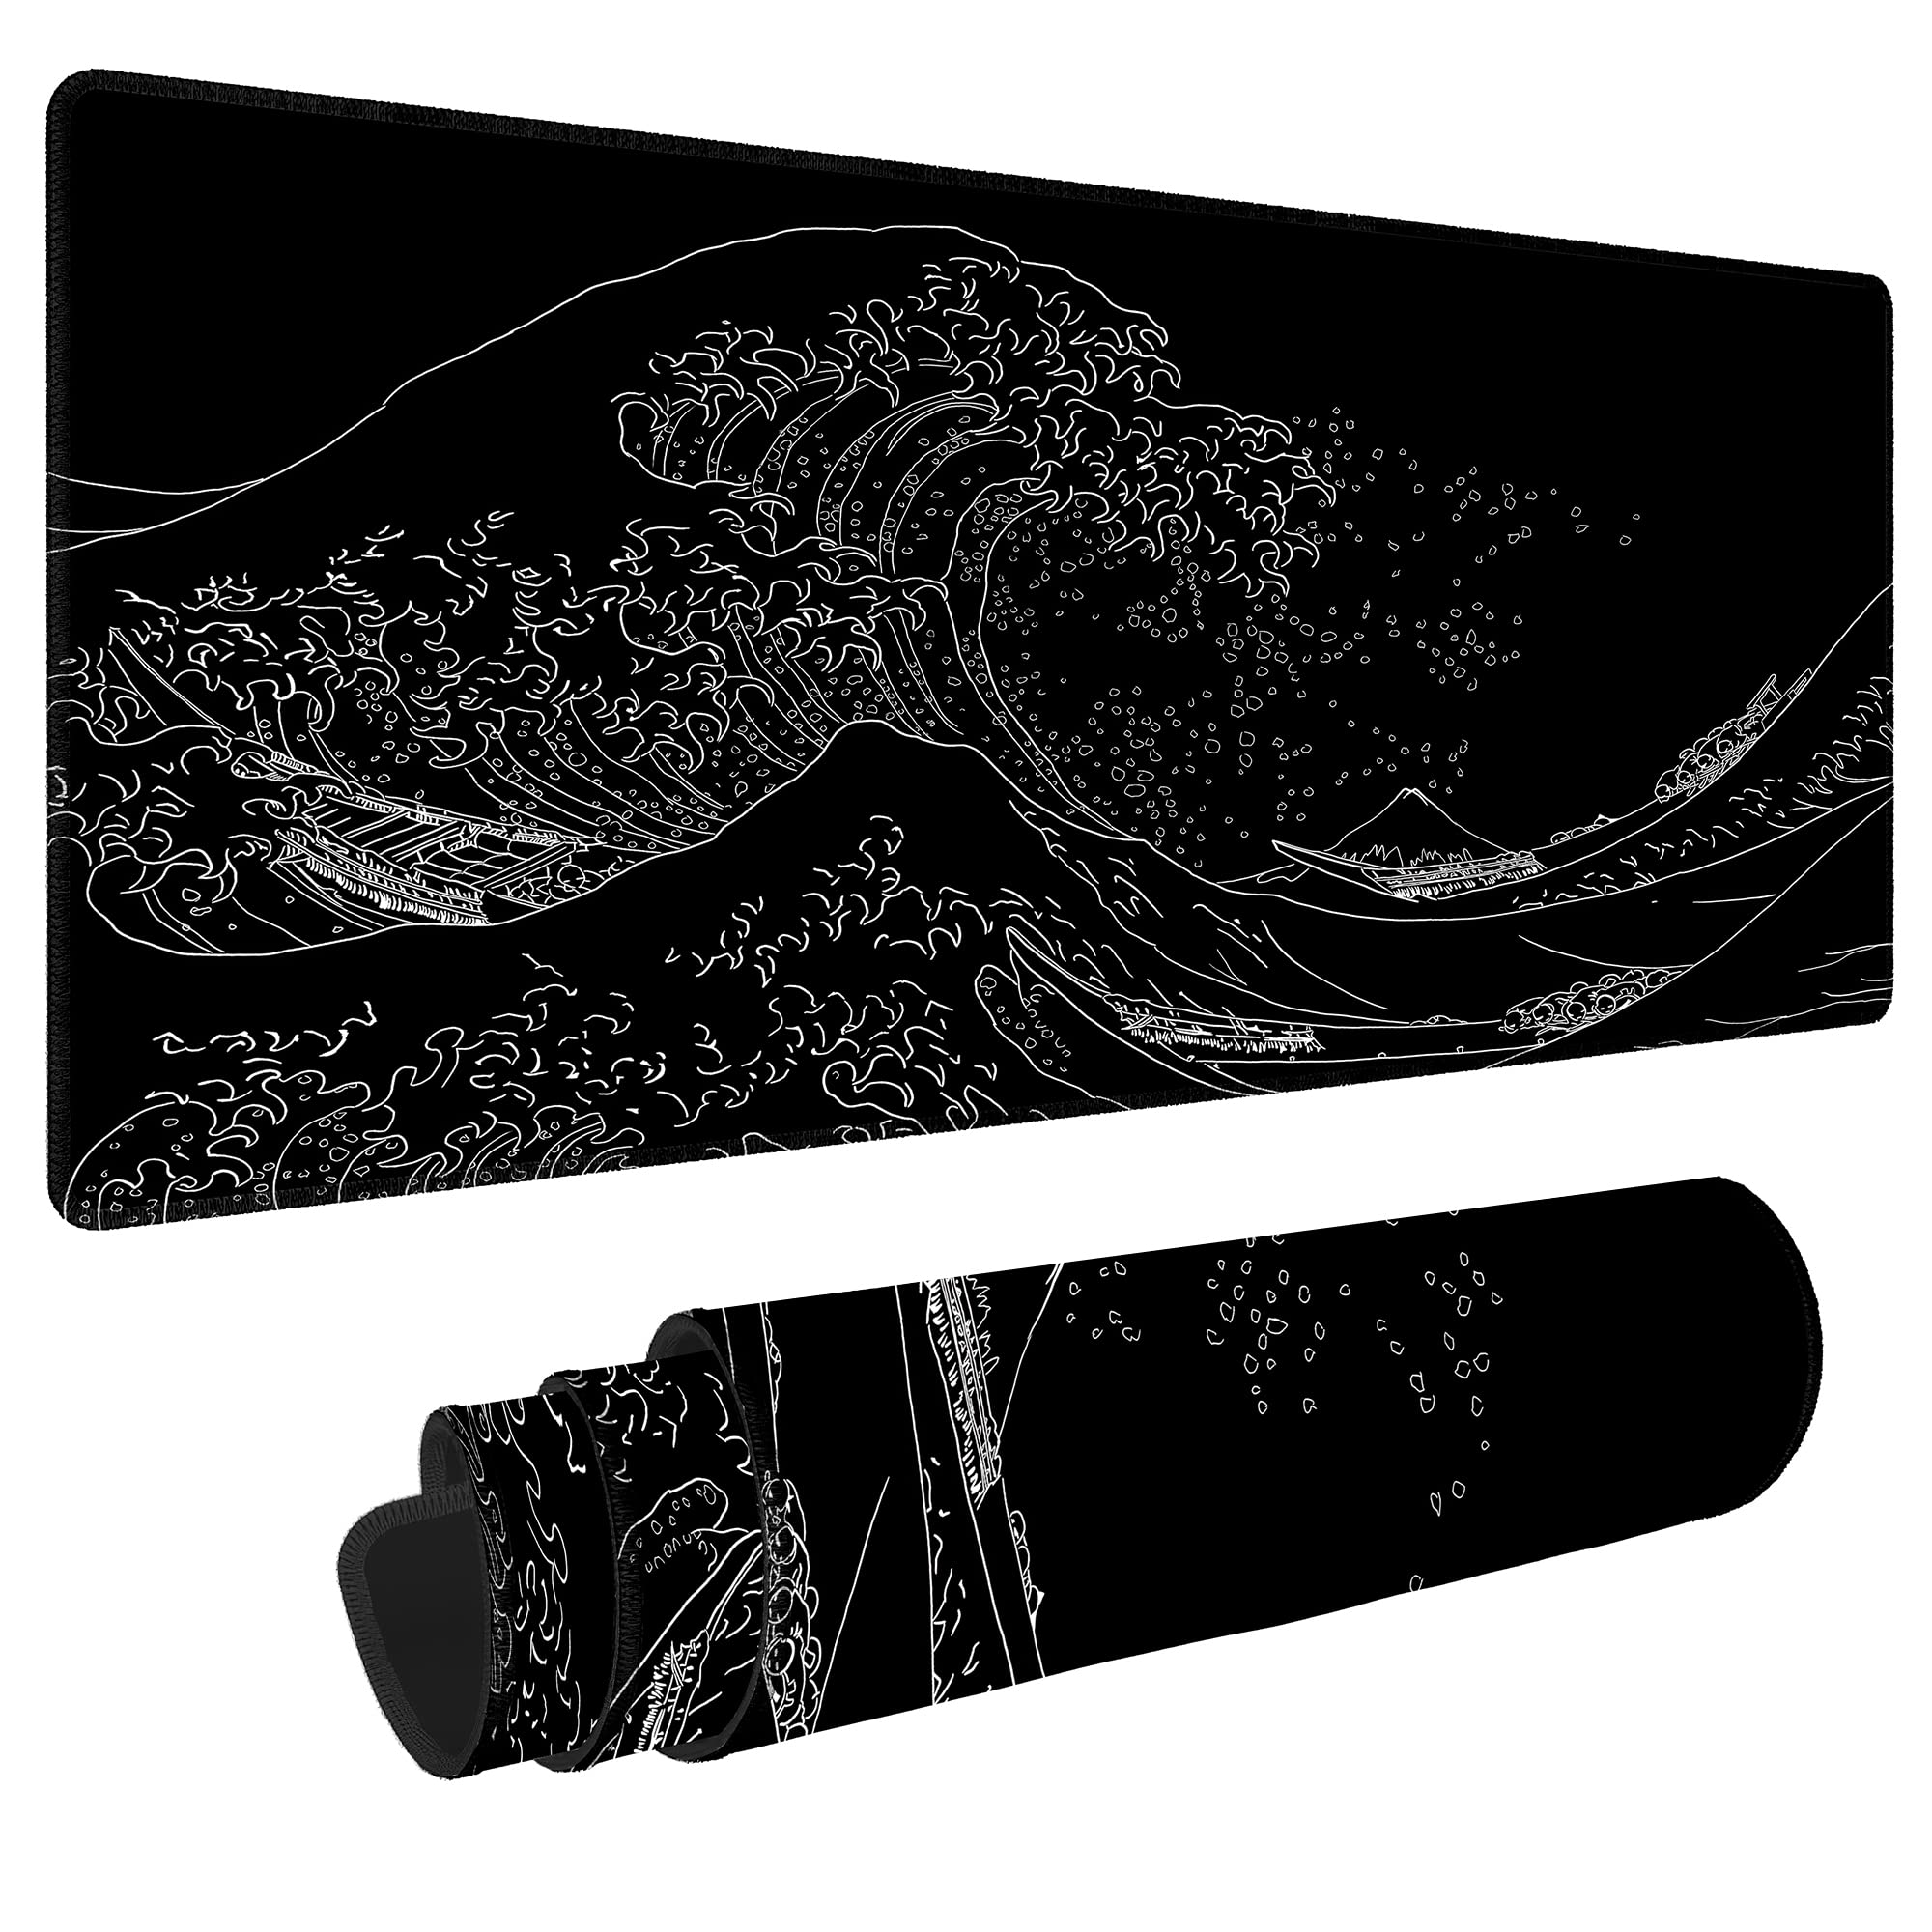 BZU Japanese Sea Wave Extended Big Mouse Pad Large,XL gaming Mouse Pad Desk Pad,315x118inch Long computer Keyboard Mouse Mat Mou